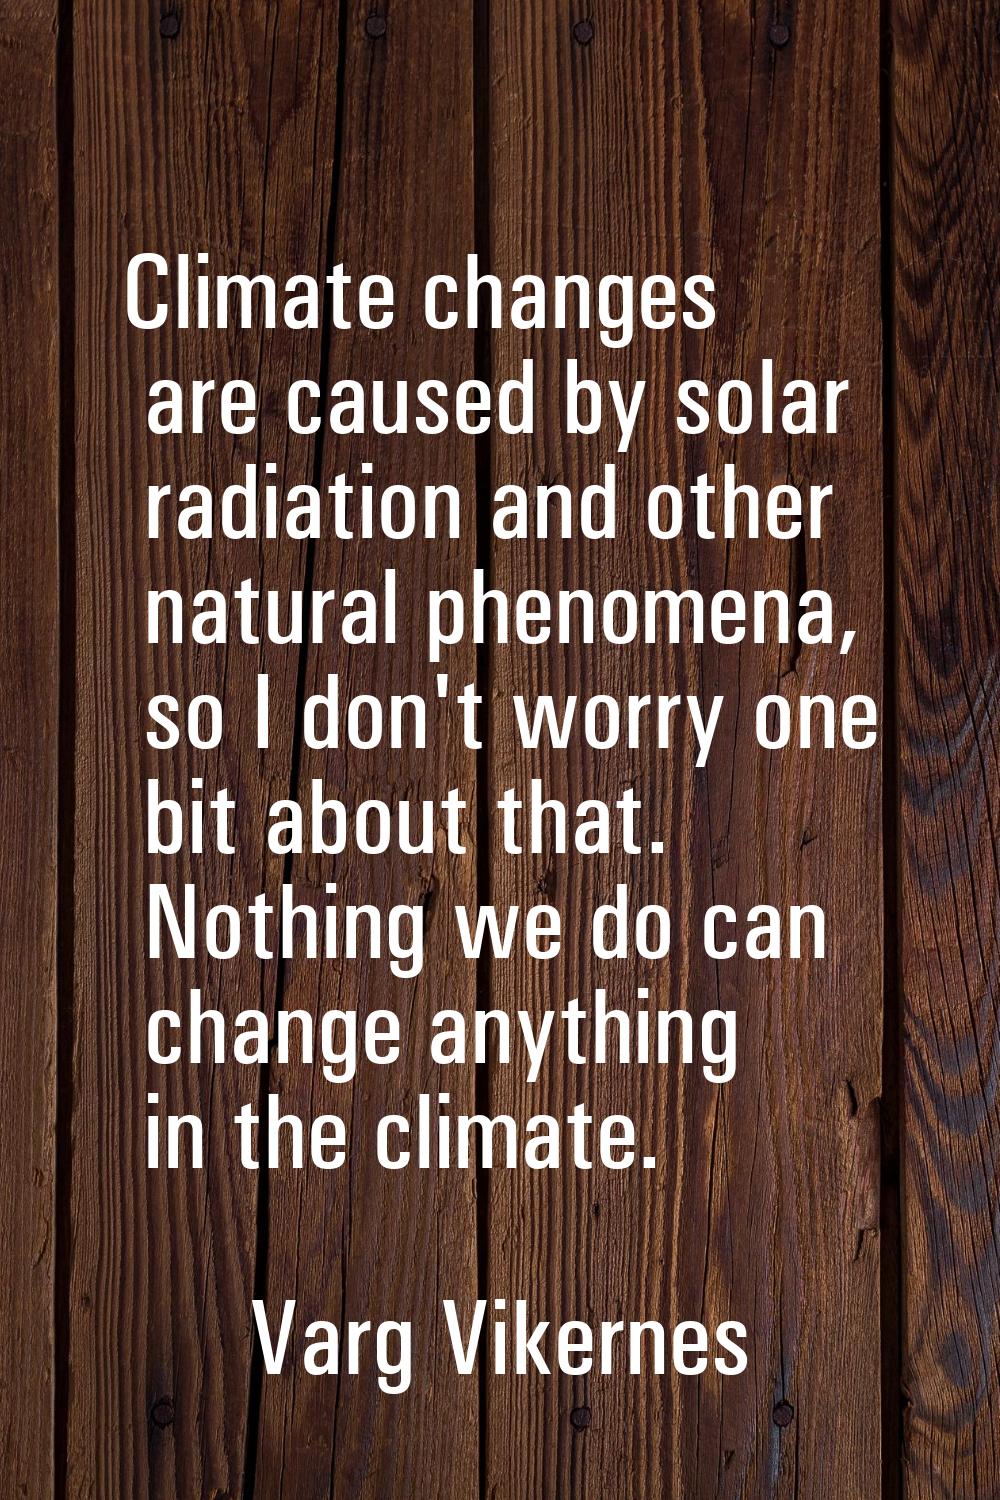 Climate changes are caused by solar radiation and other natural phenomena, so I don't worry one bit